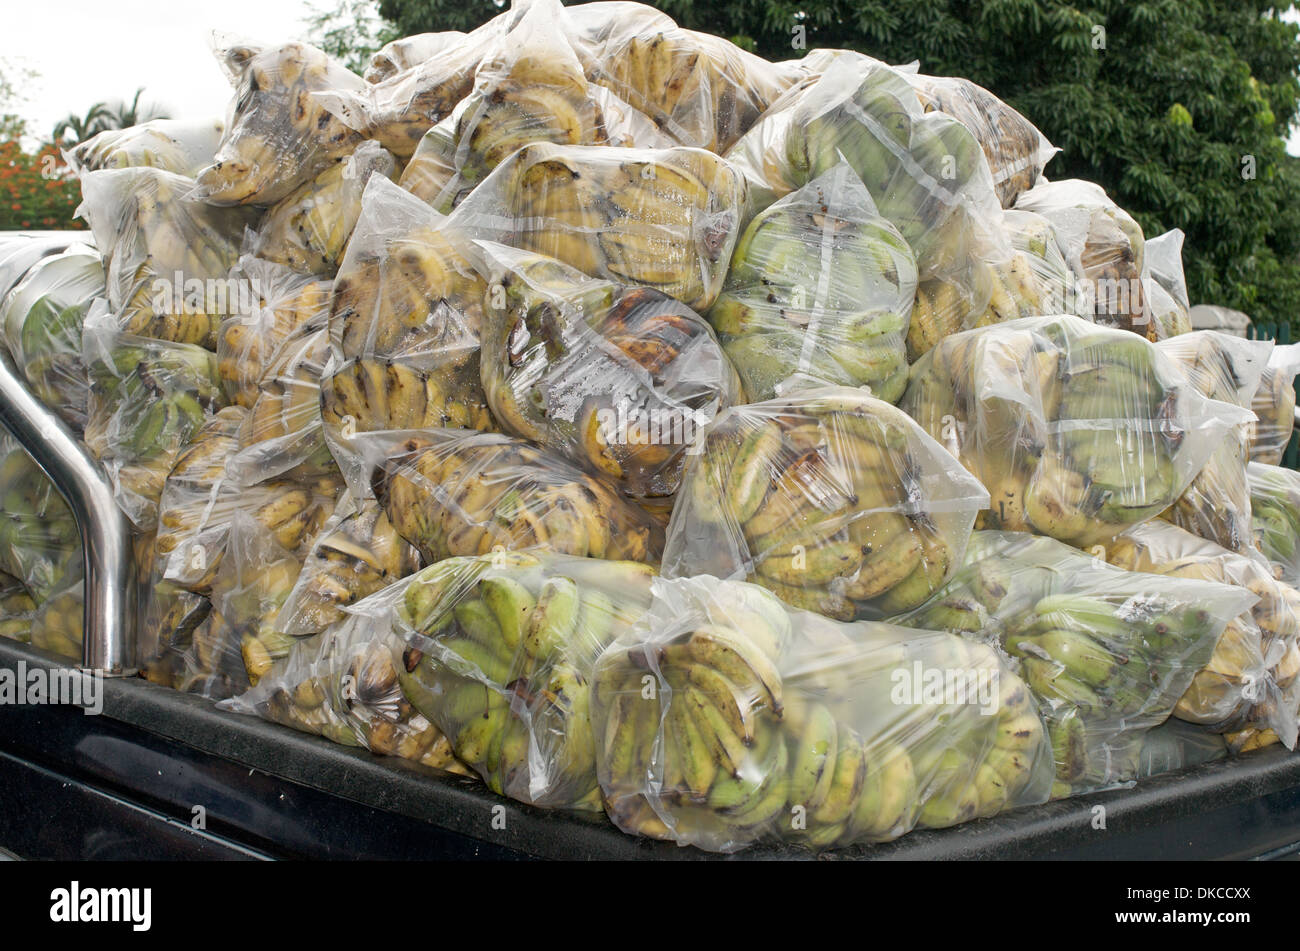 Truck piled high with bananas in Chiang Mai, Thailand Stock Photo